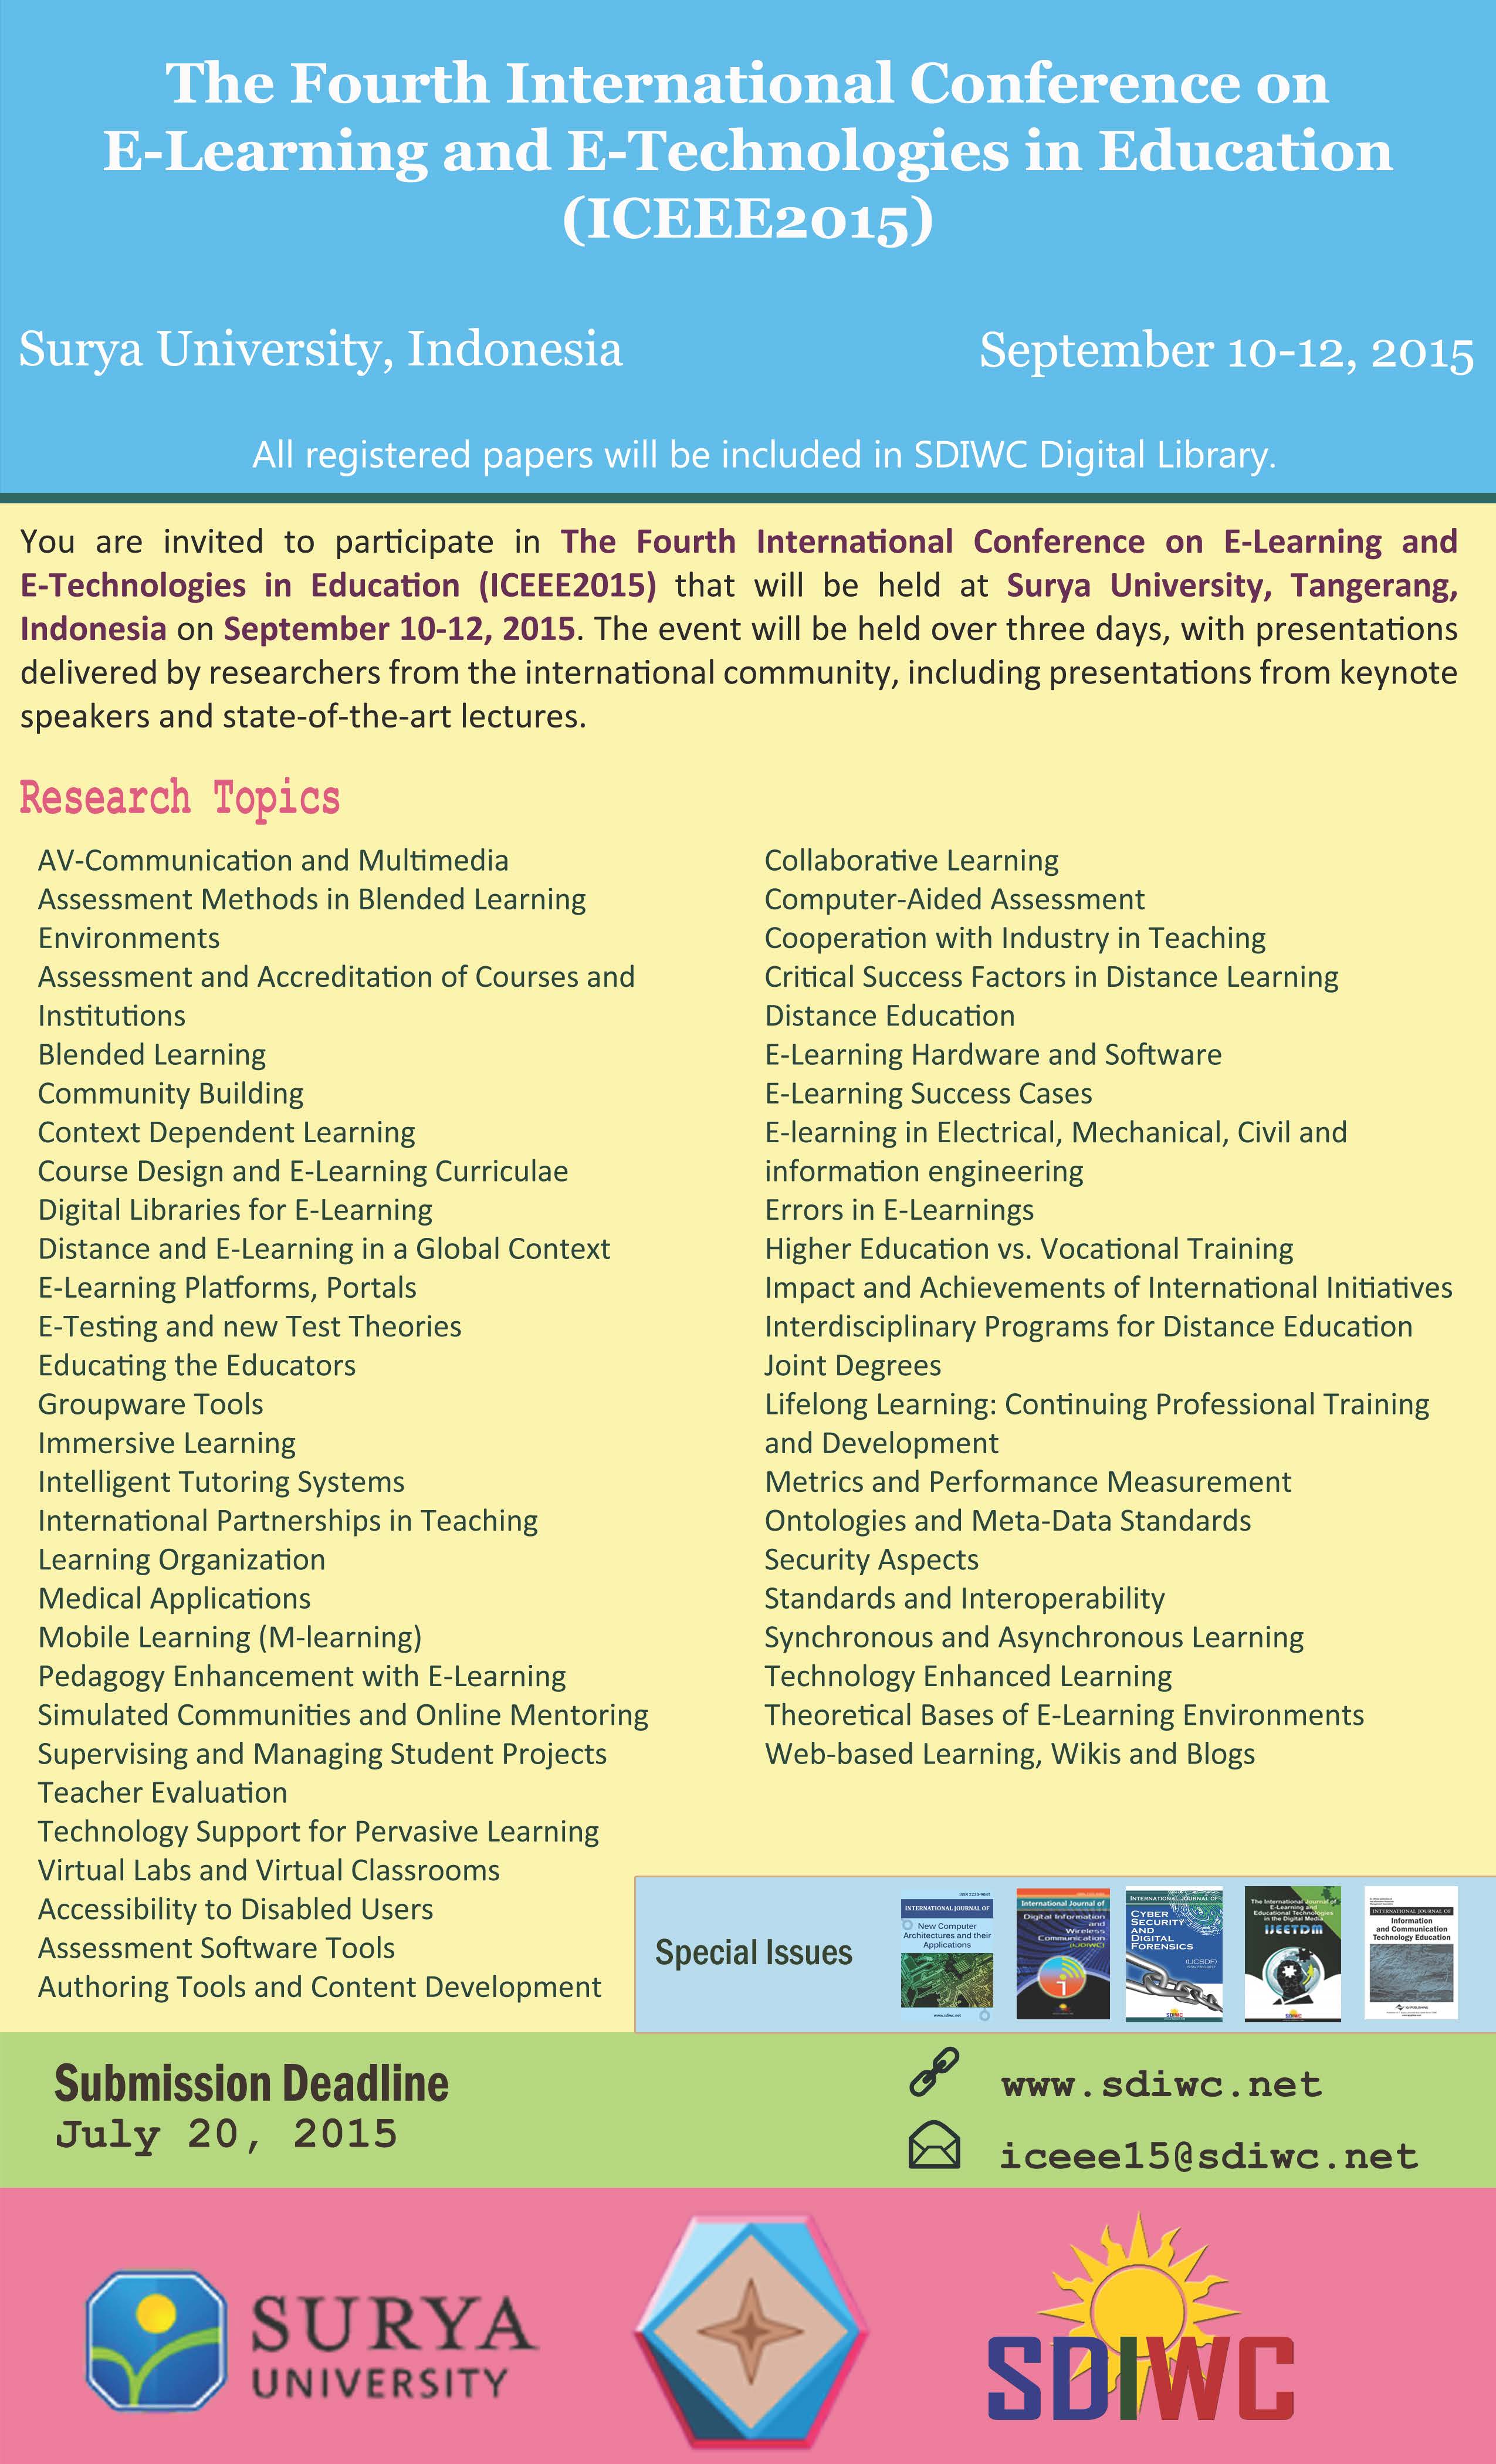 The Fourth International Conference on E-Learning and E-Technologies in Education